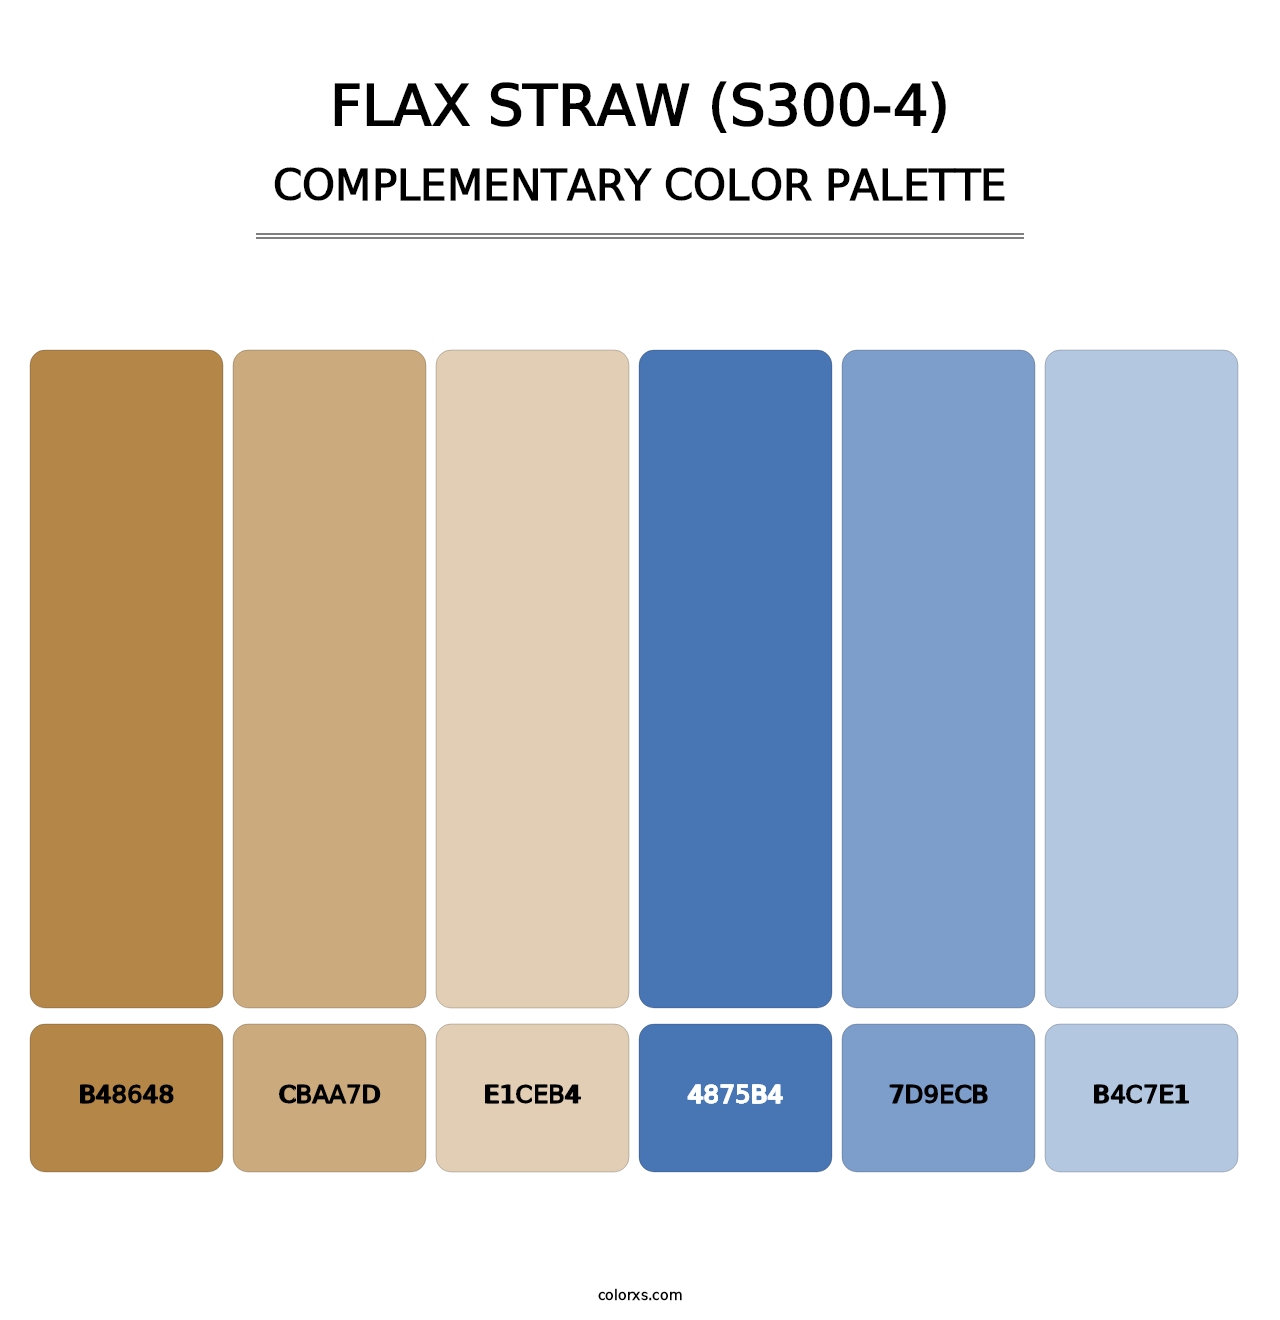 Flax Straw (S300-4) - Complementary Color Palette